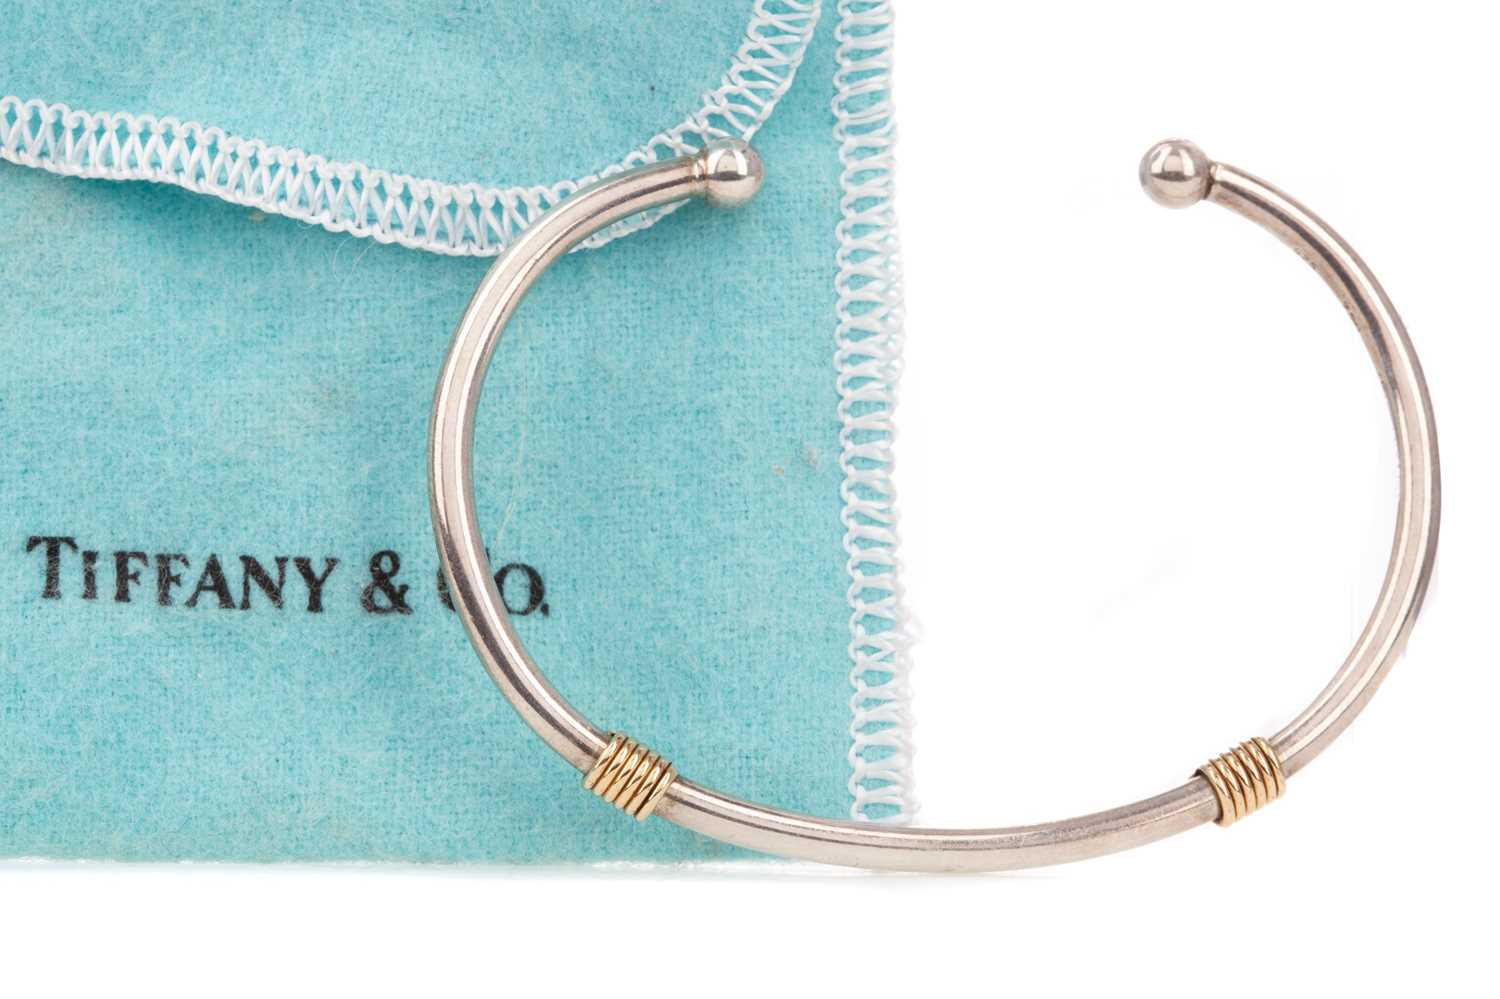 Lot 1202 - A SILVER AND GOLD TORQUE BANGLE BY TIFFANY & CO